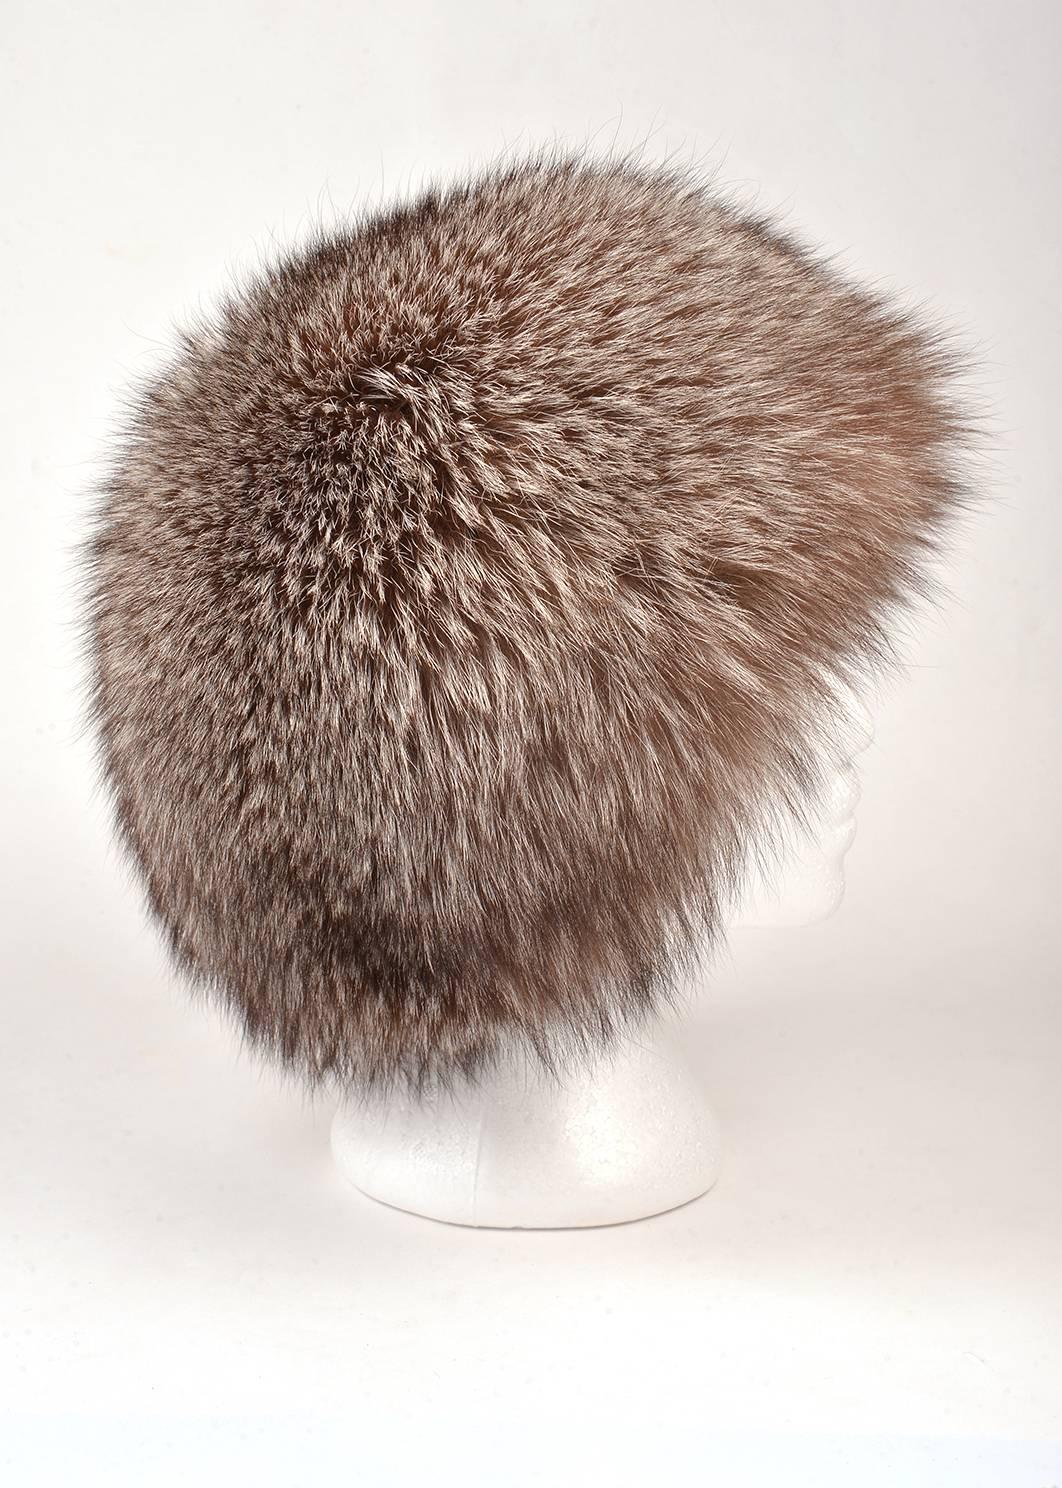 
Irresistibly soft, comfortable, and warm fox fur hat. Mixtures of white, light and dark shades of brown are found throughout the hat, as well as dashes of white, thrown in like a hail storm throughout the fur. 

Circumference: 20 1/2, Diameter: 6